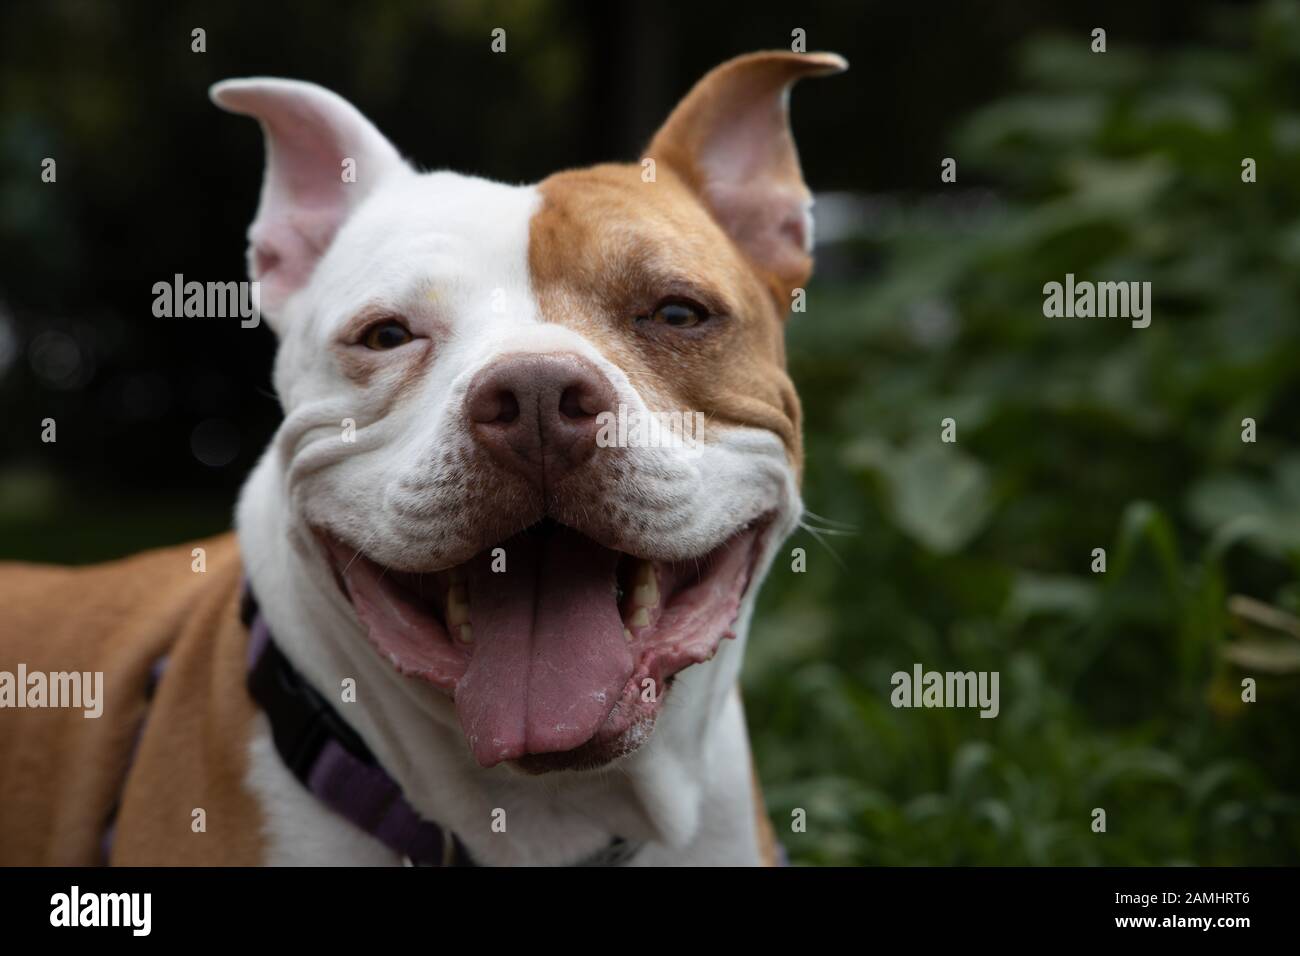 Close up of dogs head Pit Bull with its mouth open happy looking Stock Photo